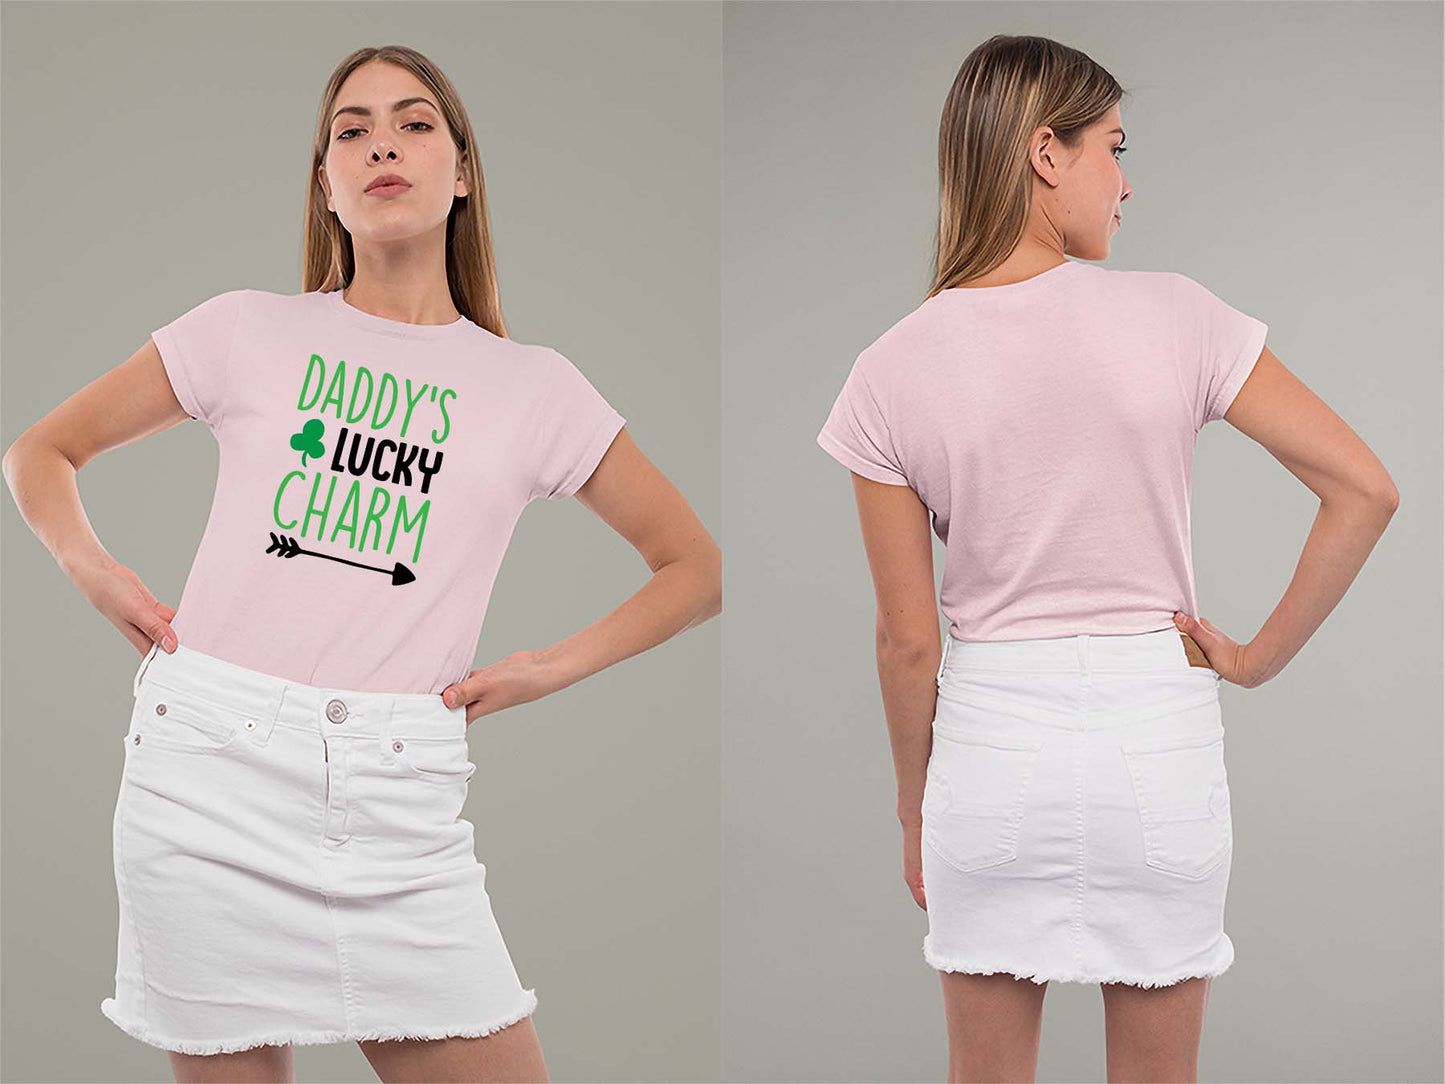 Fat Dave Daddy's Lucky Charm Ladies Crew (Round) Neck Shirt Small Light Pink